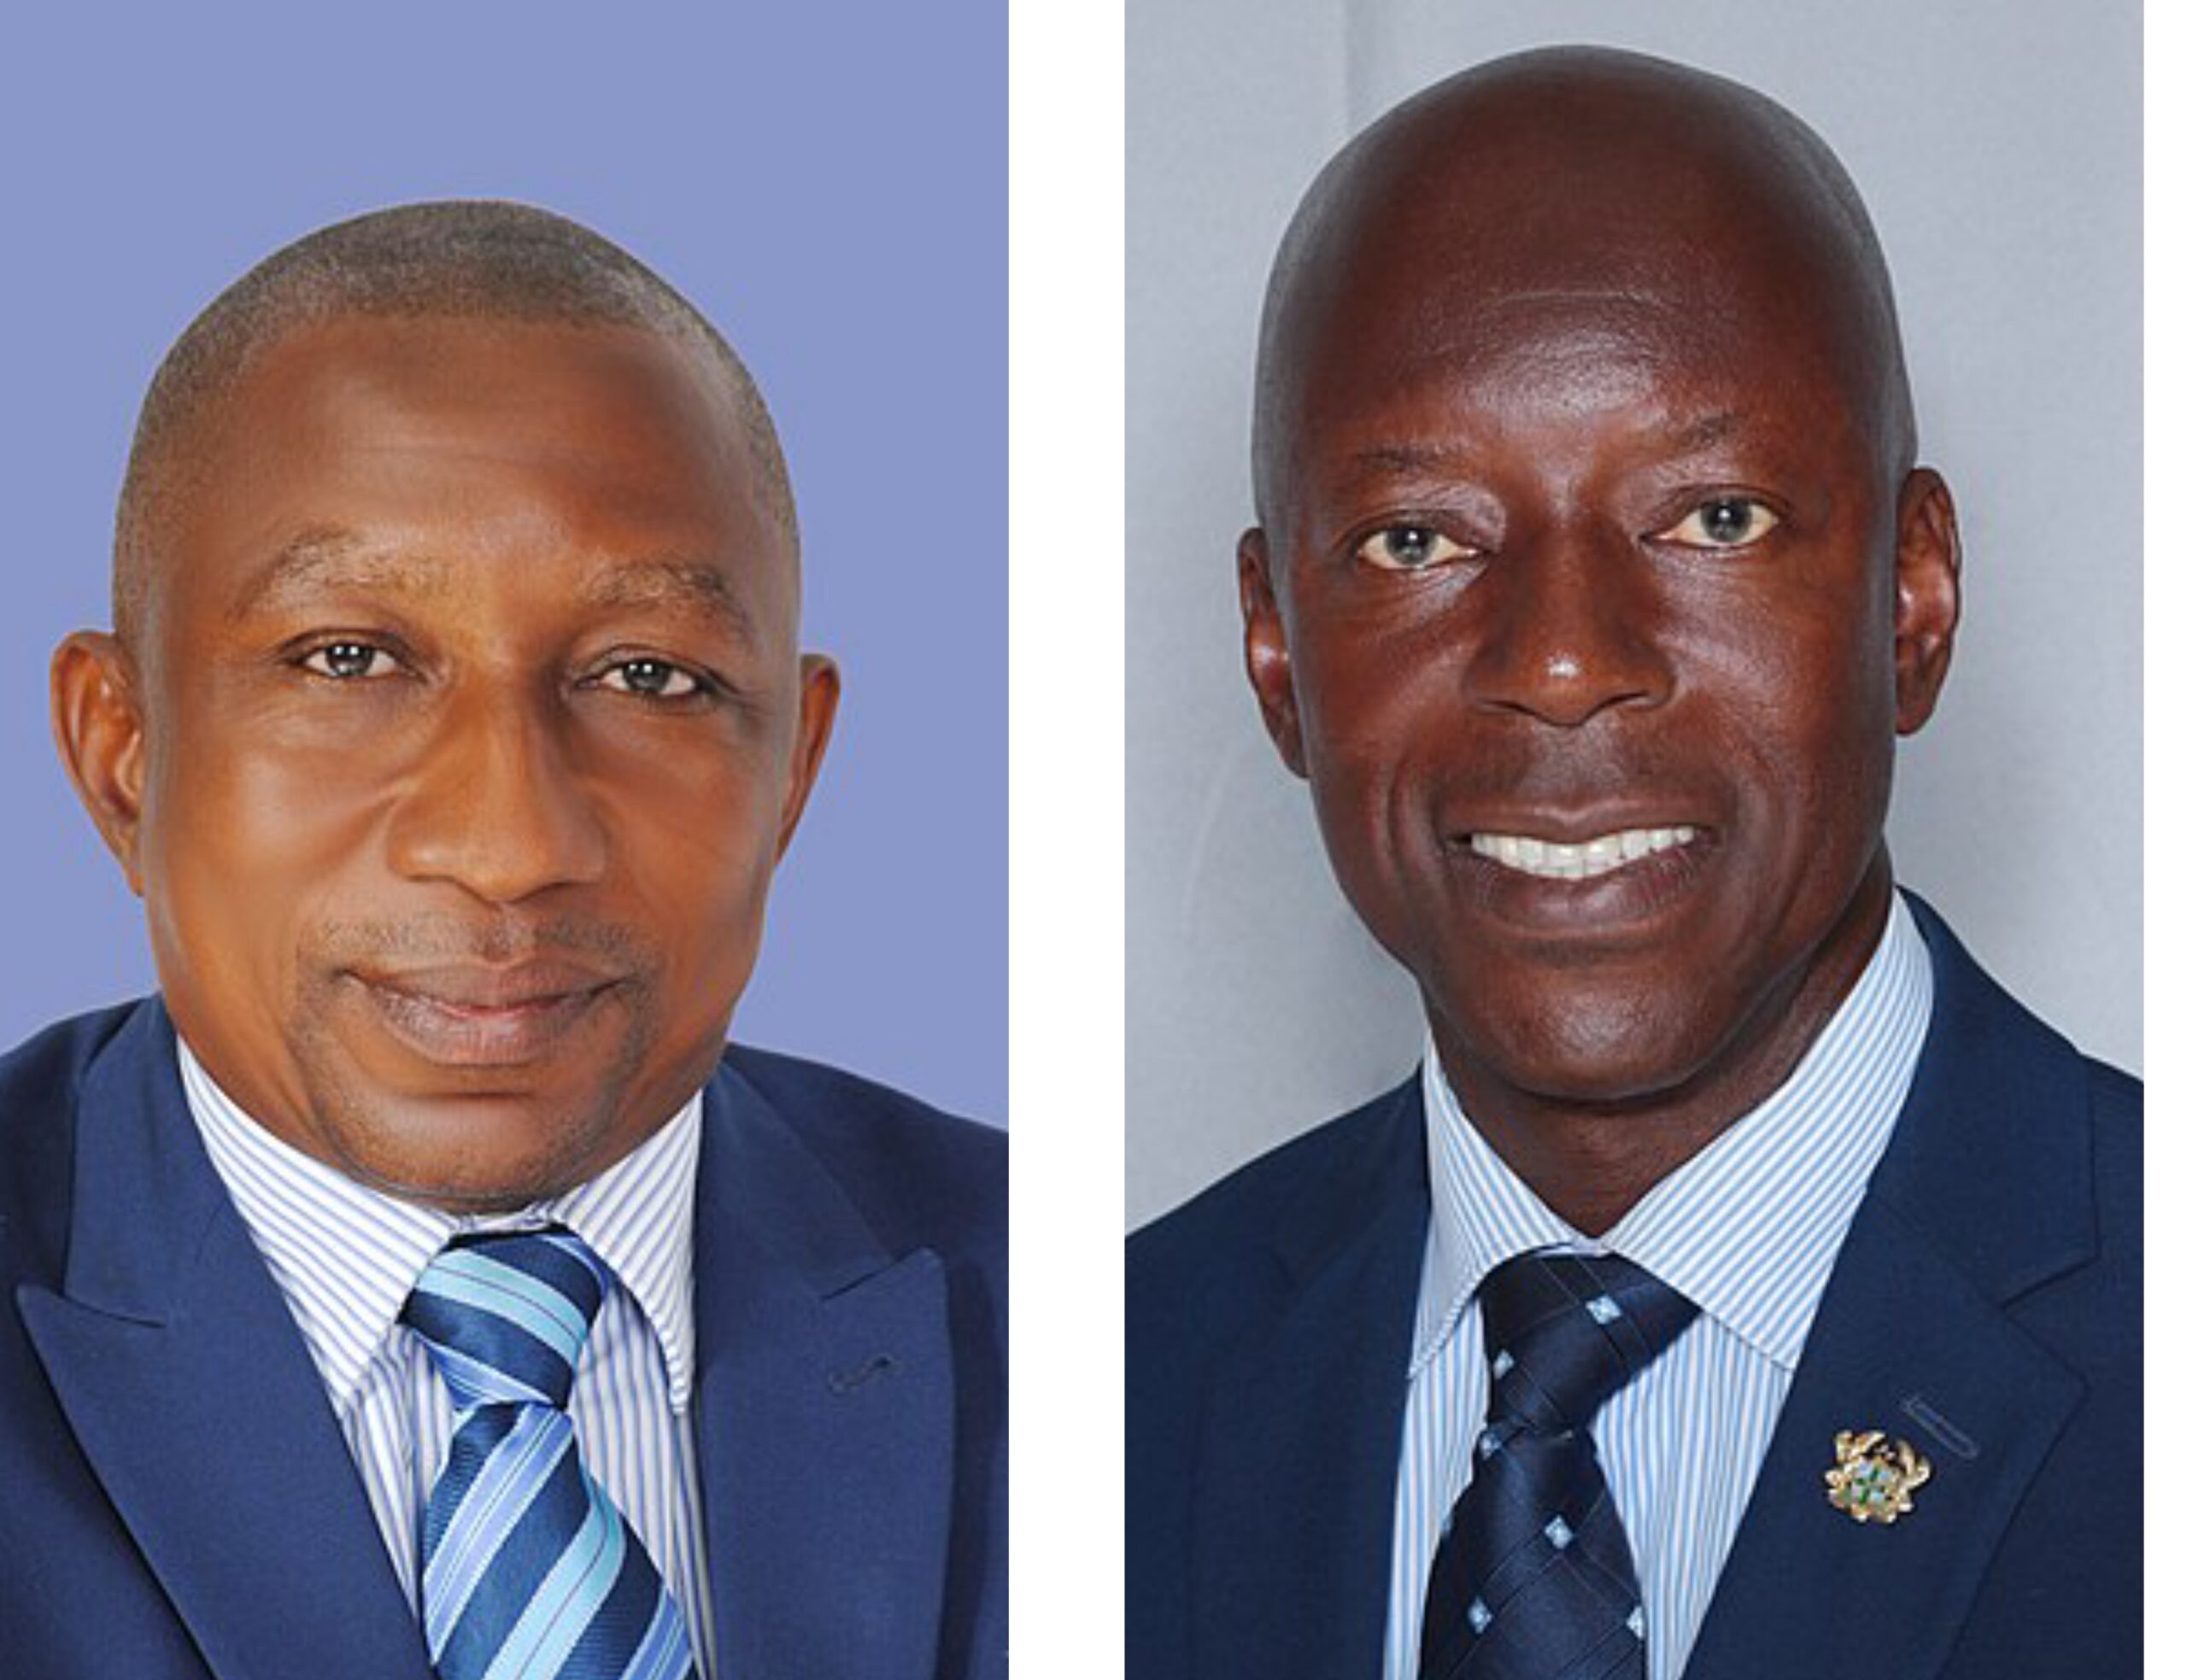 Two Ghana’s Anti-Corruption MPs Lose Seats, but Chairman Retains